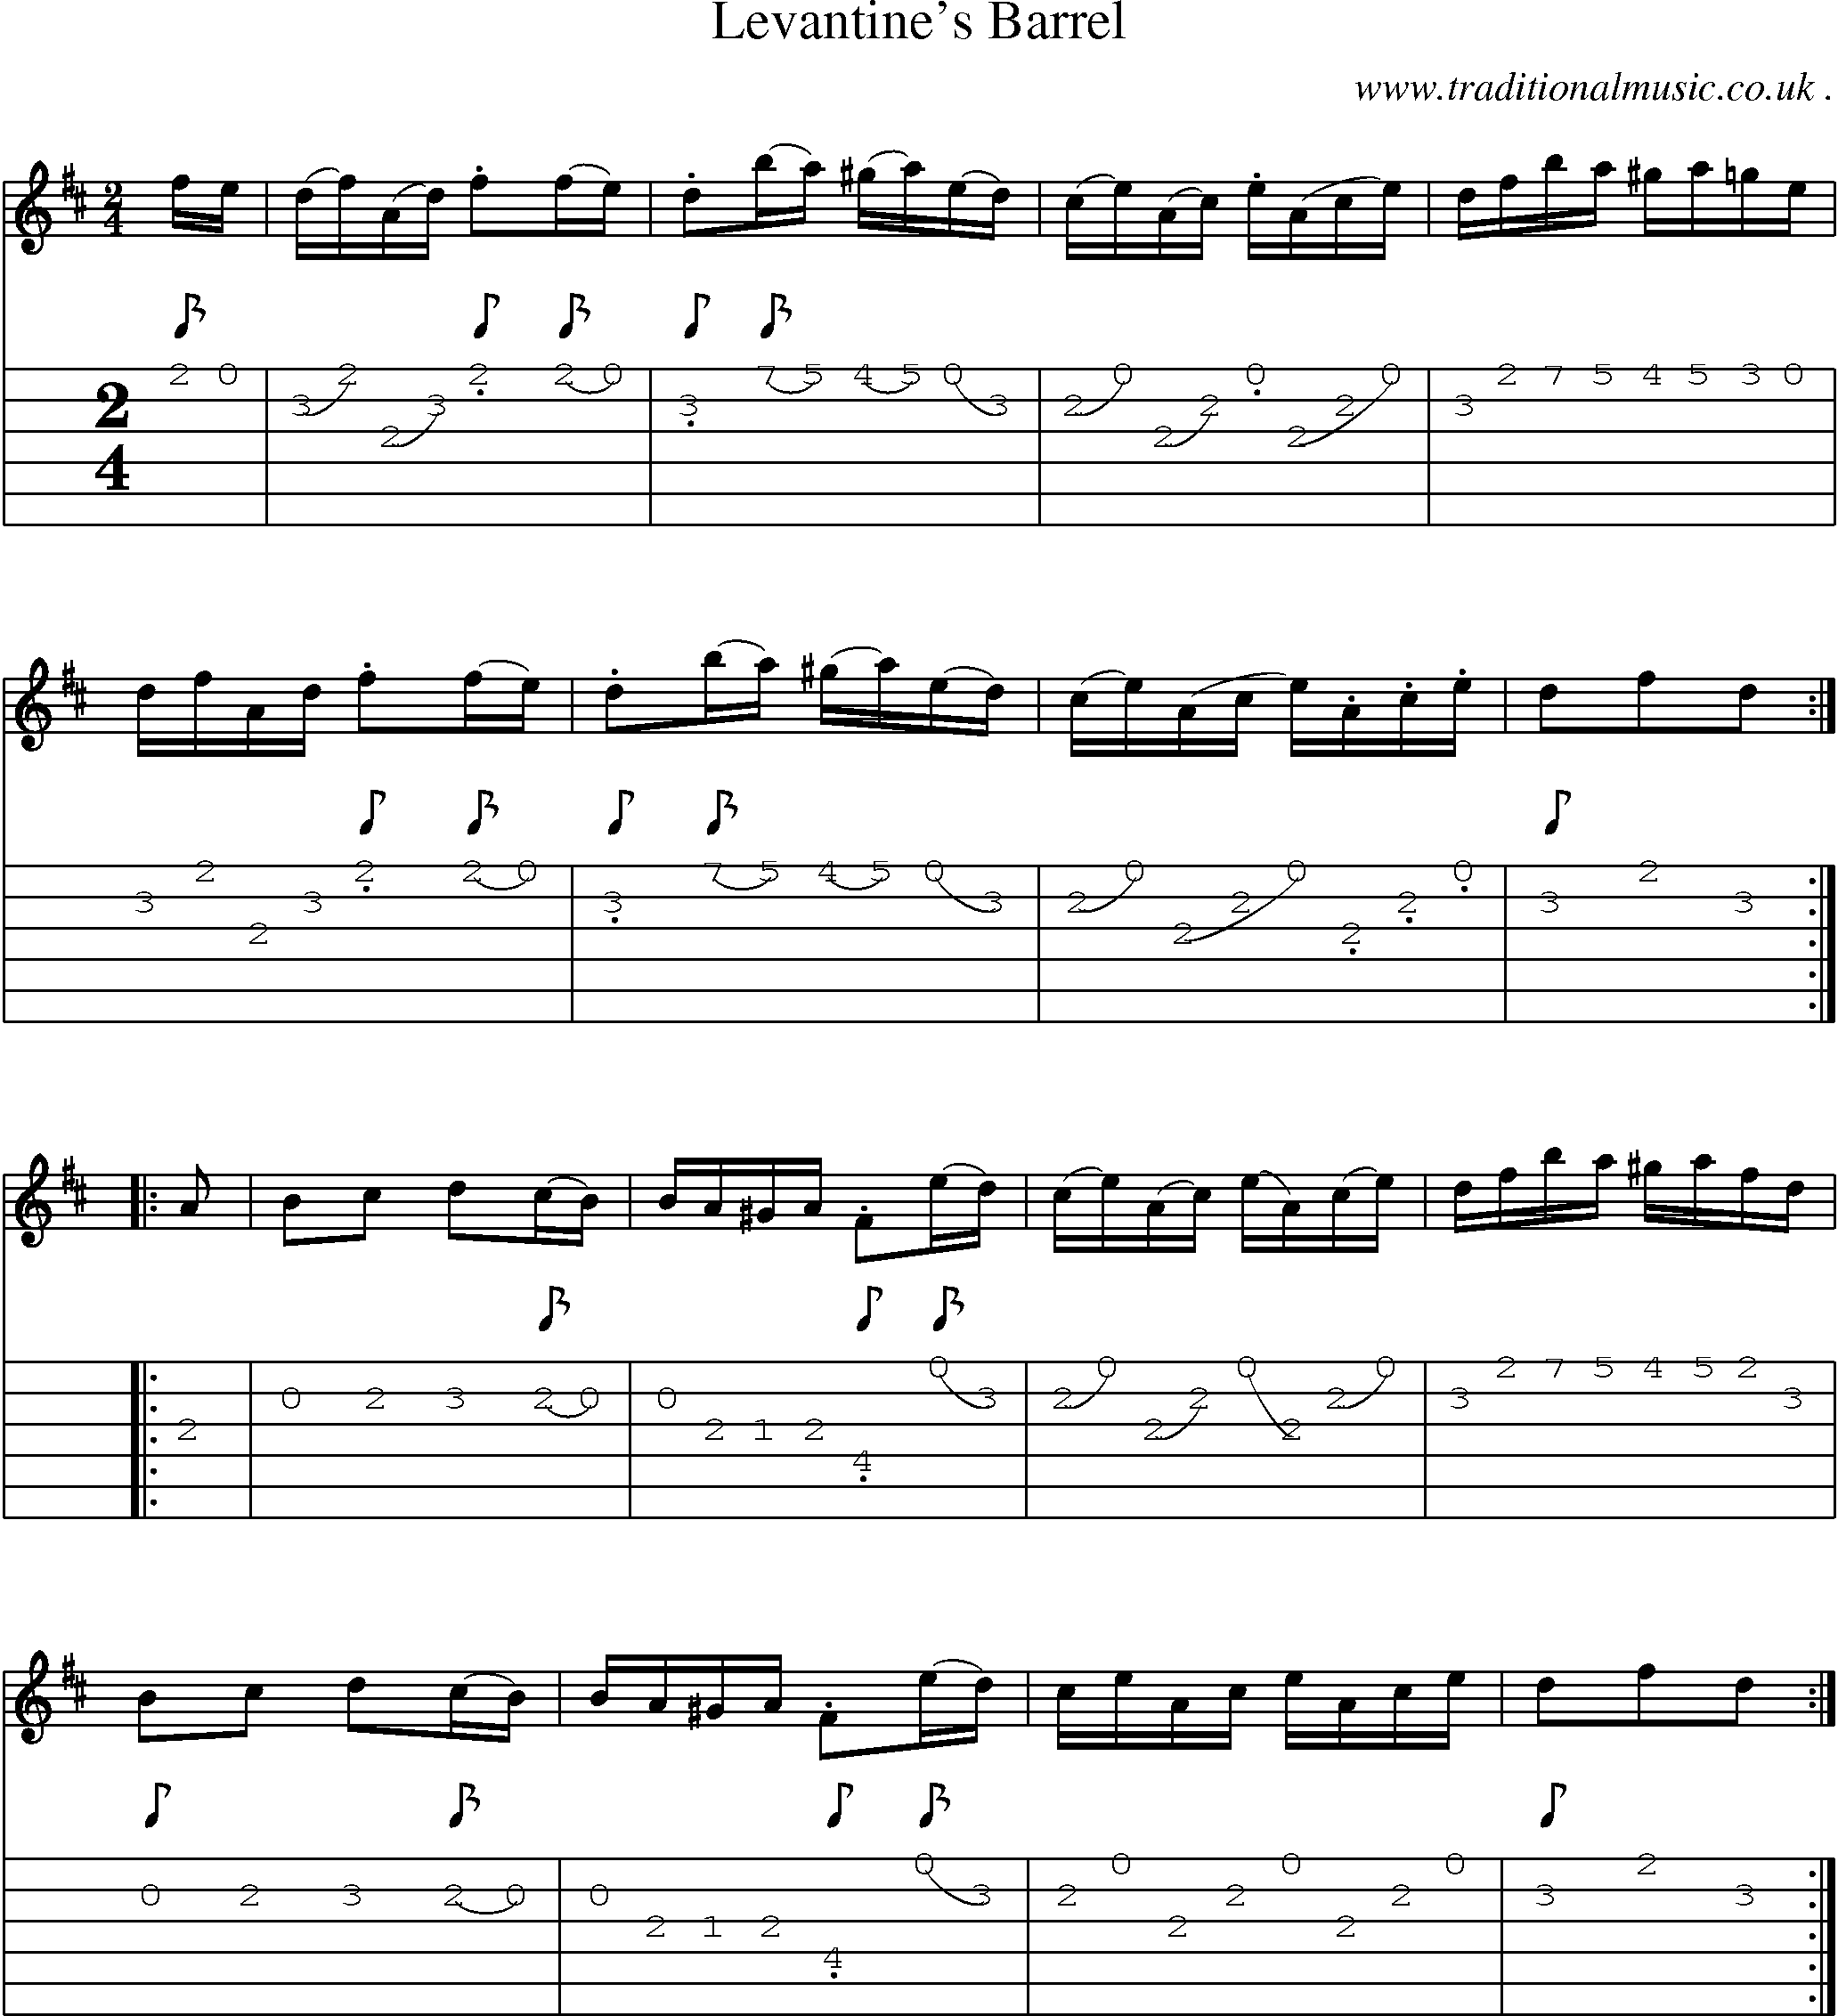 Sheet-Music and Guitar Tabs for Levantines Barrel